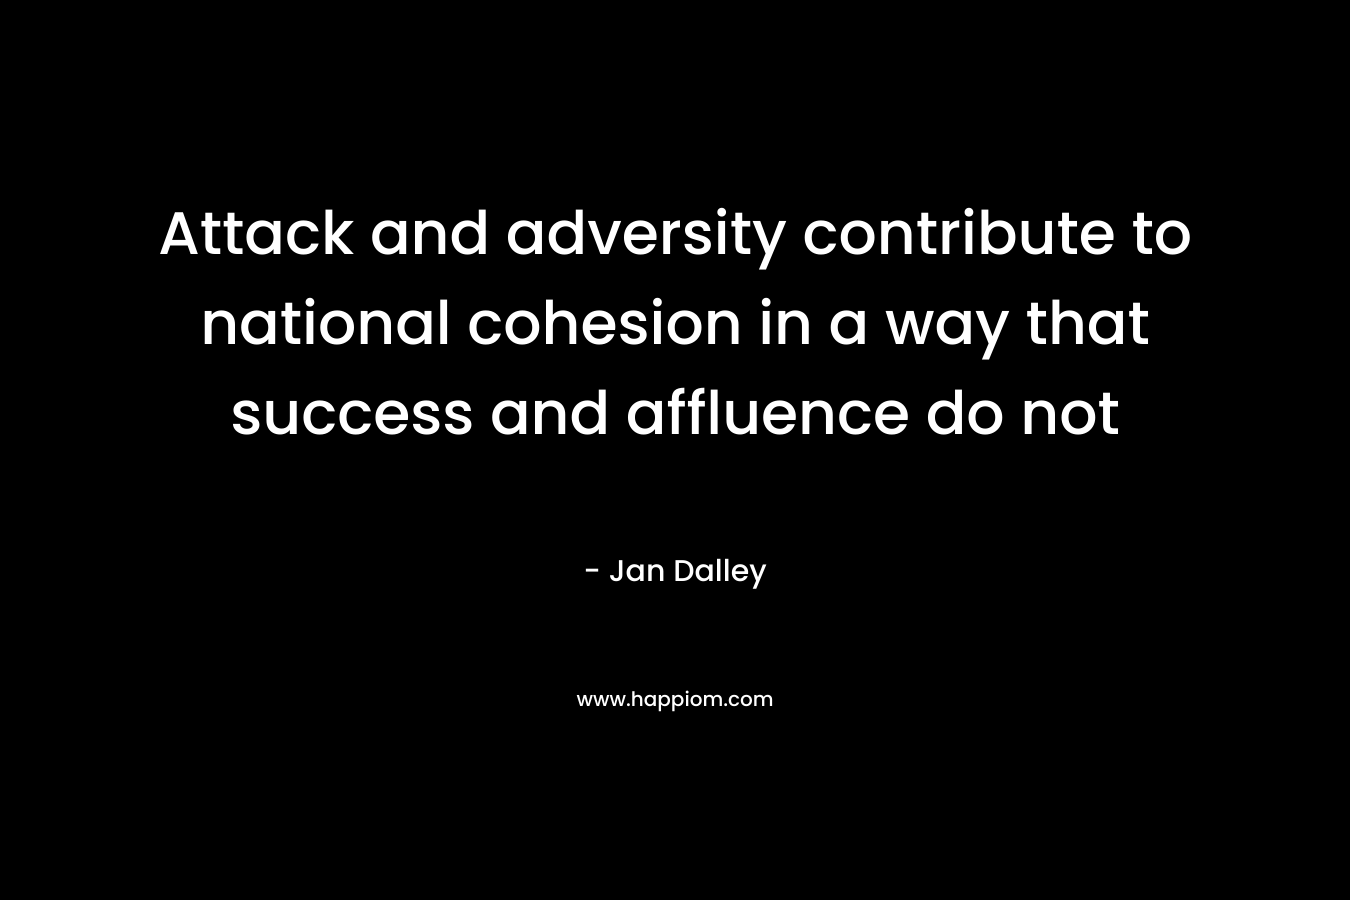 Attack and adversity contribute to national cohesion in a way that success and affluence do not – Jan Dalley